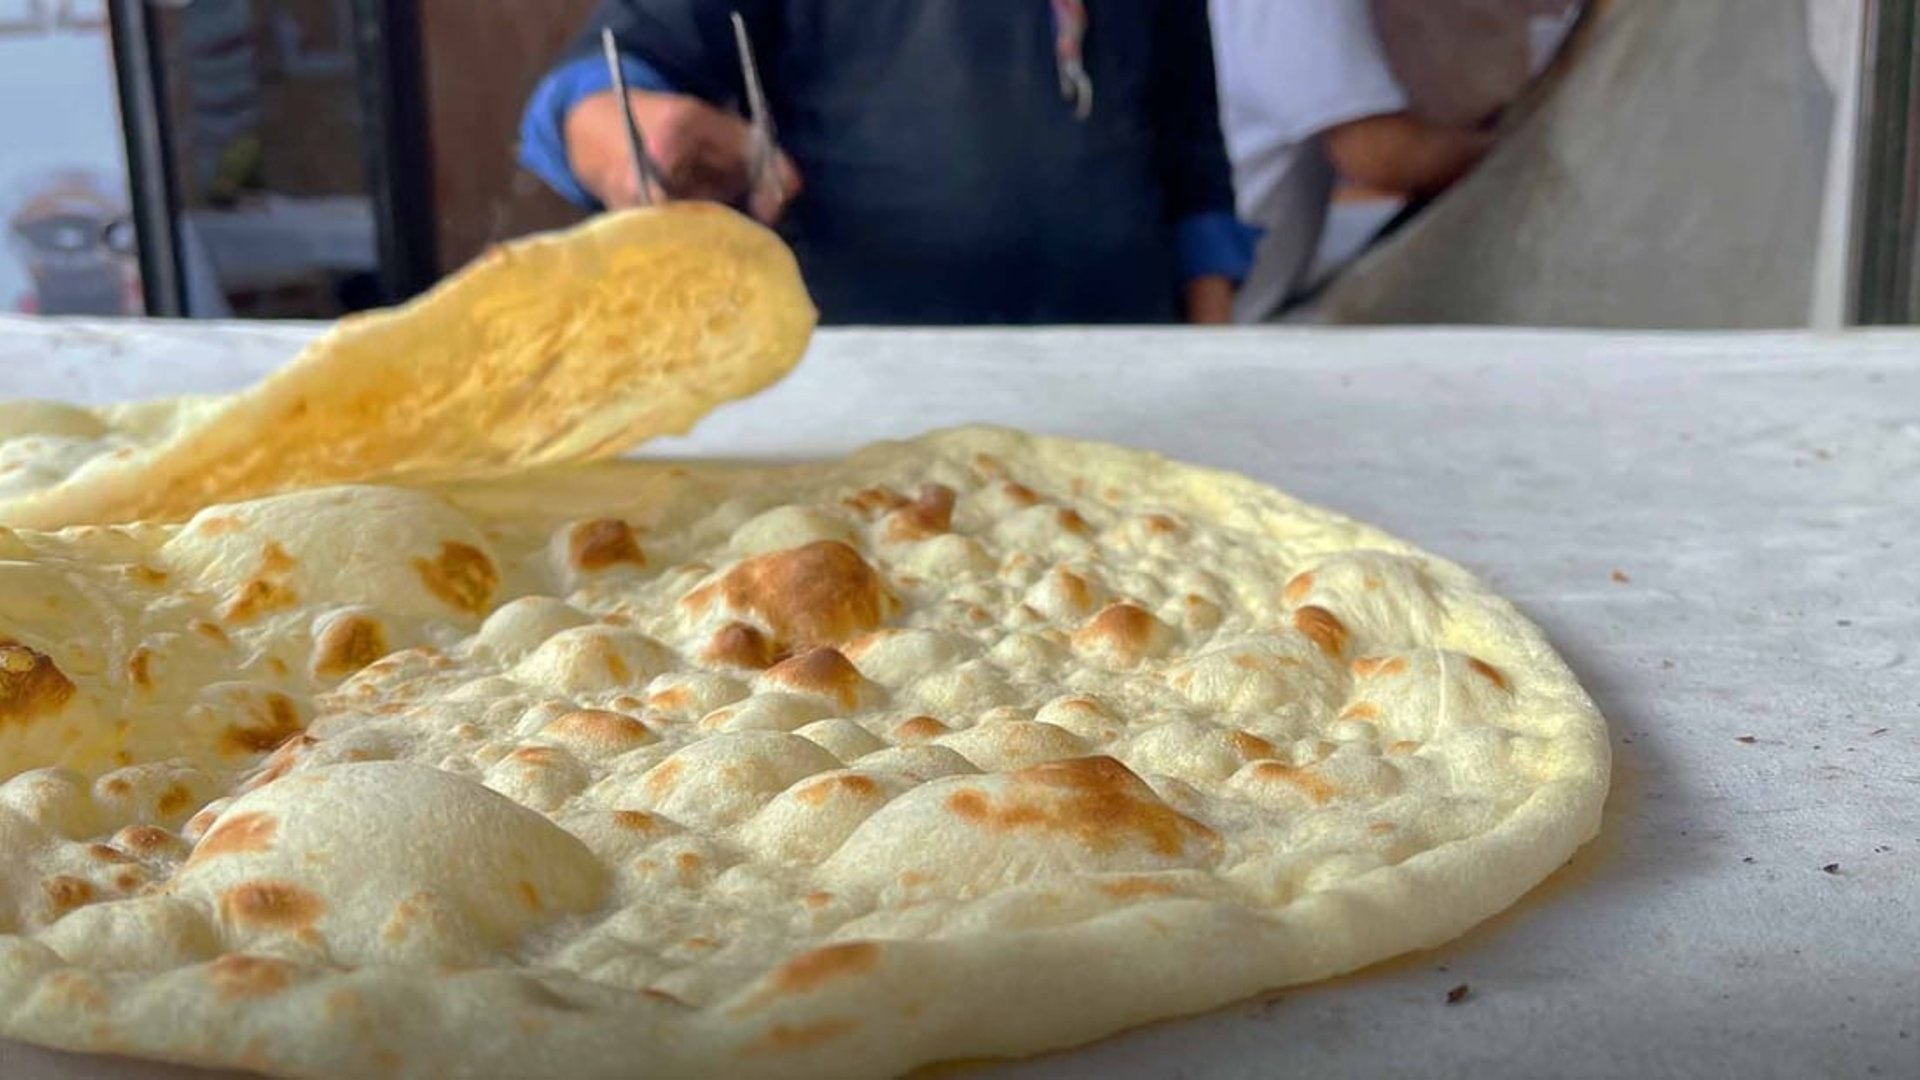 Bread pricing dispute emerges in Sulaymaniyah as bakeries reject proposed rates